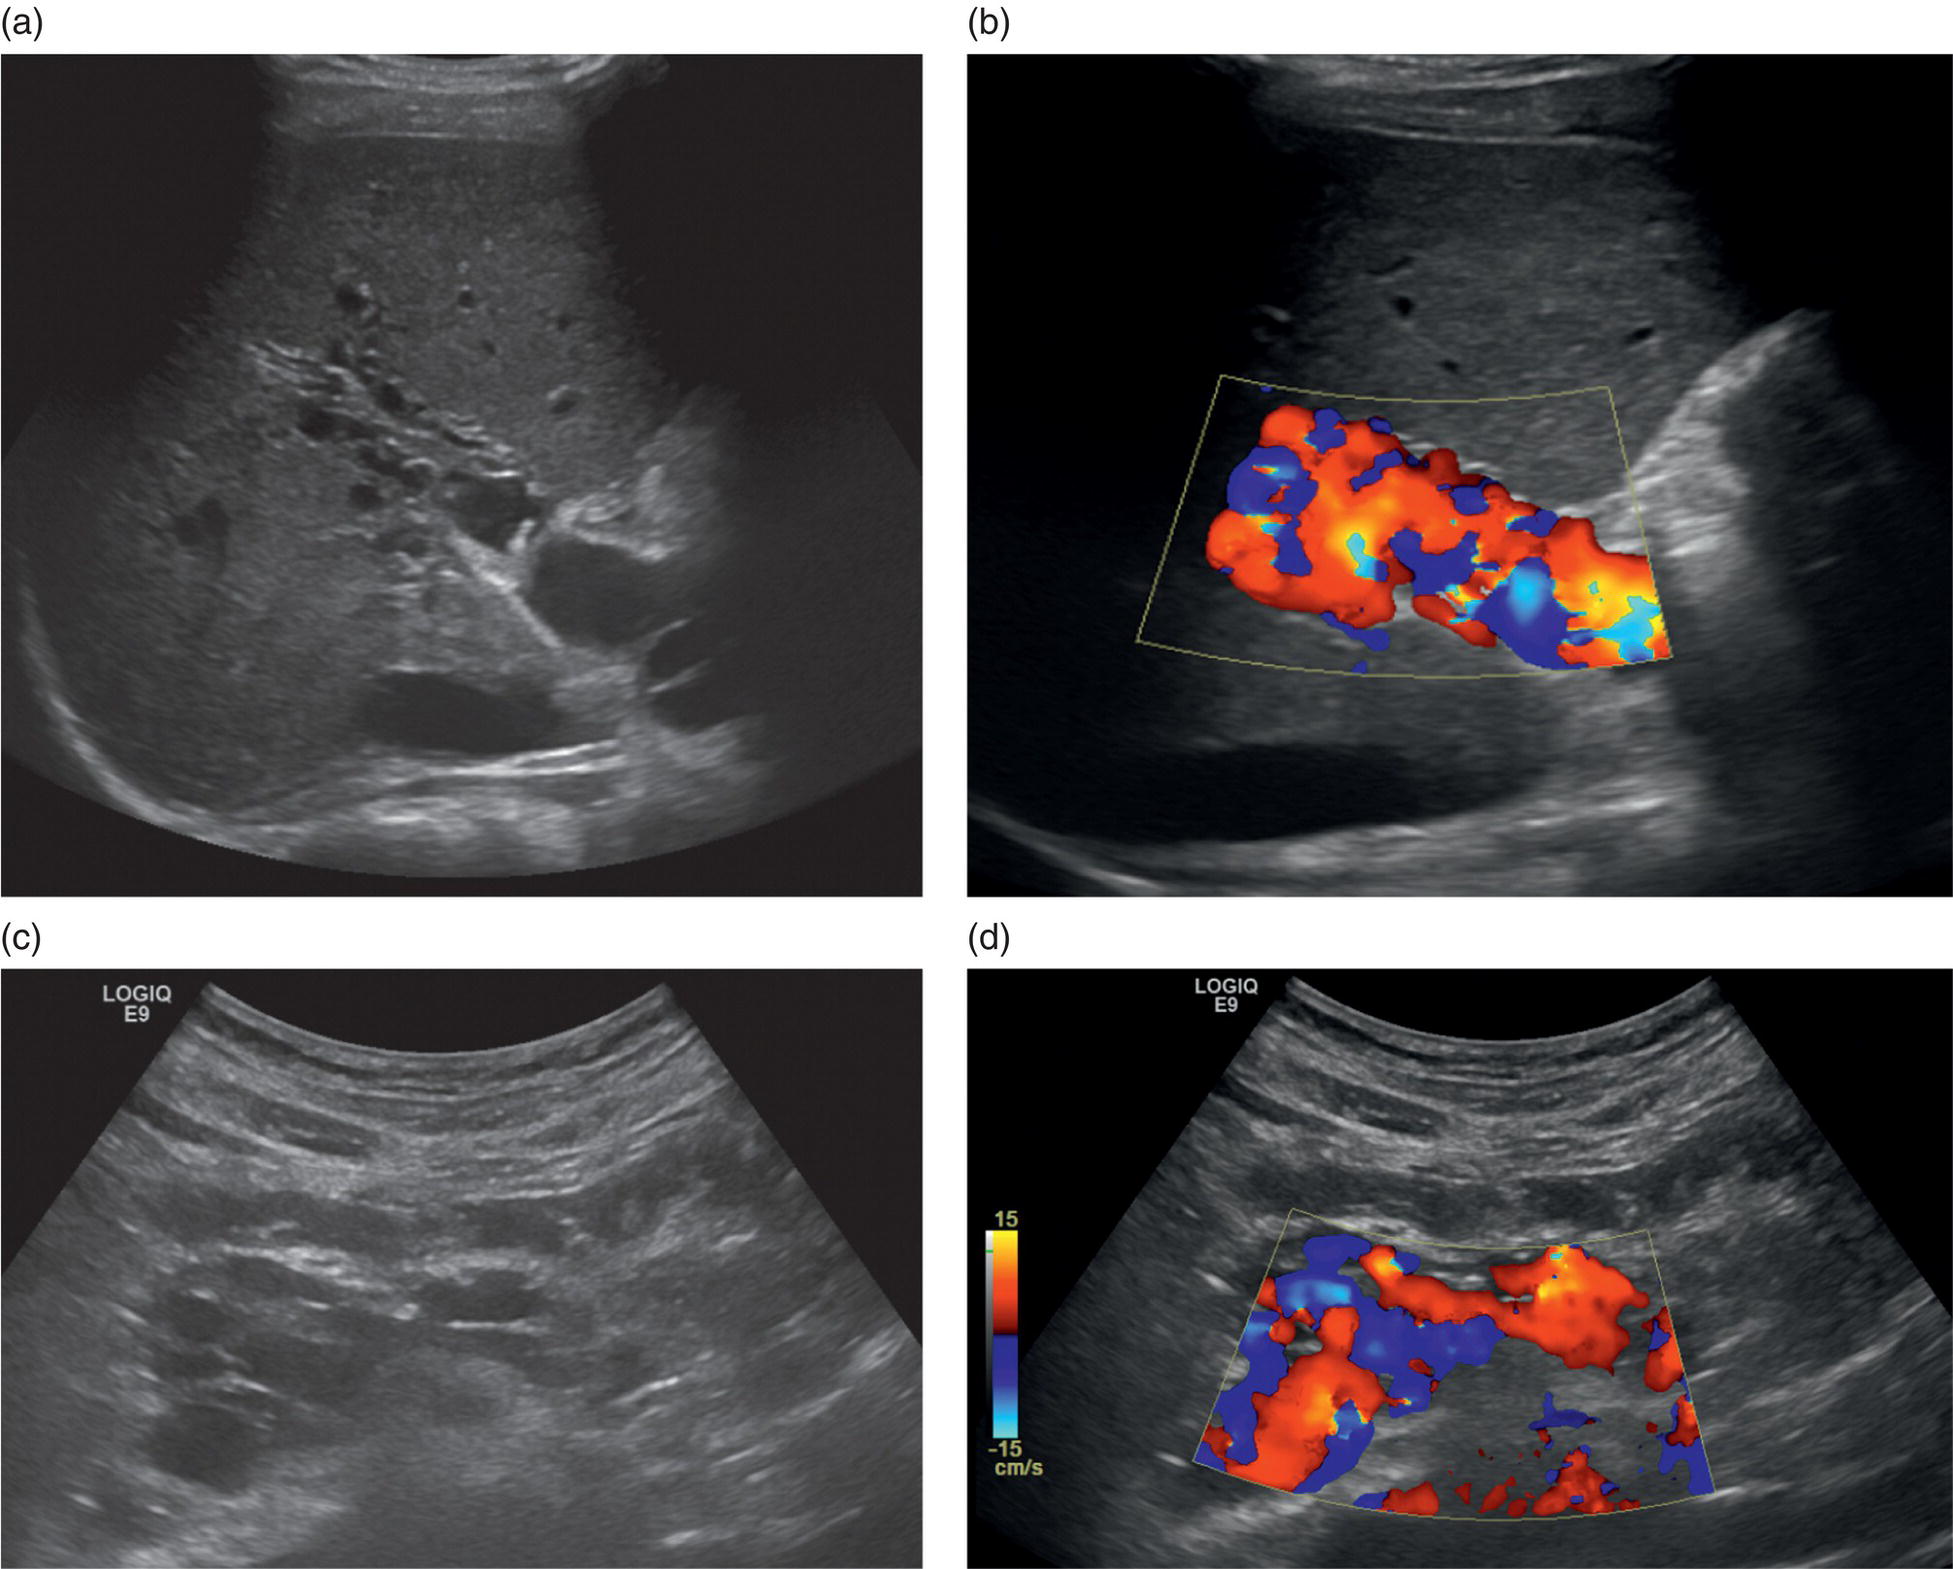 A set of four ultrasound images of a patient a. The intrahepatic portal vein is replaced by fibrous tissues. B. Hepatopetal flow with cavernous metamorphosis is visible on the color Doppler. C and d. There is an extrahepatic portal vein. The afflicted area is squared.